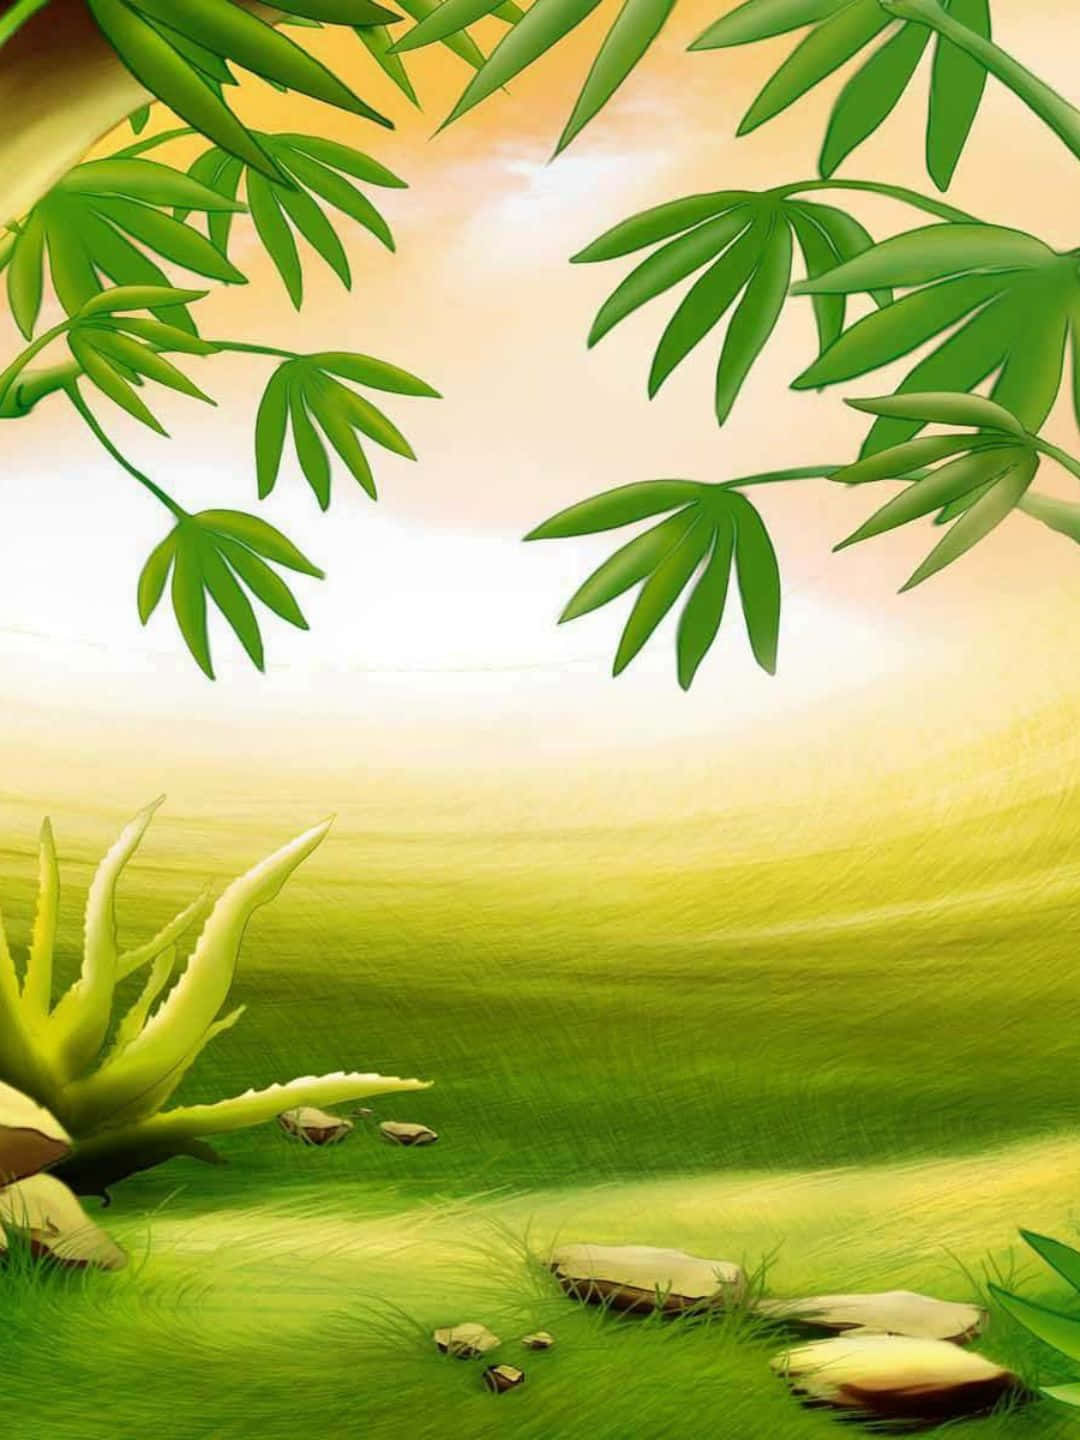 1440p Bamboo Background Fanart Painting Bamboo Leaves